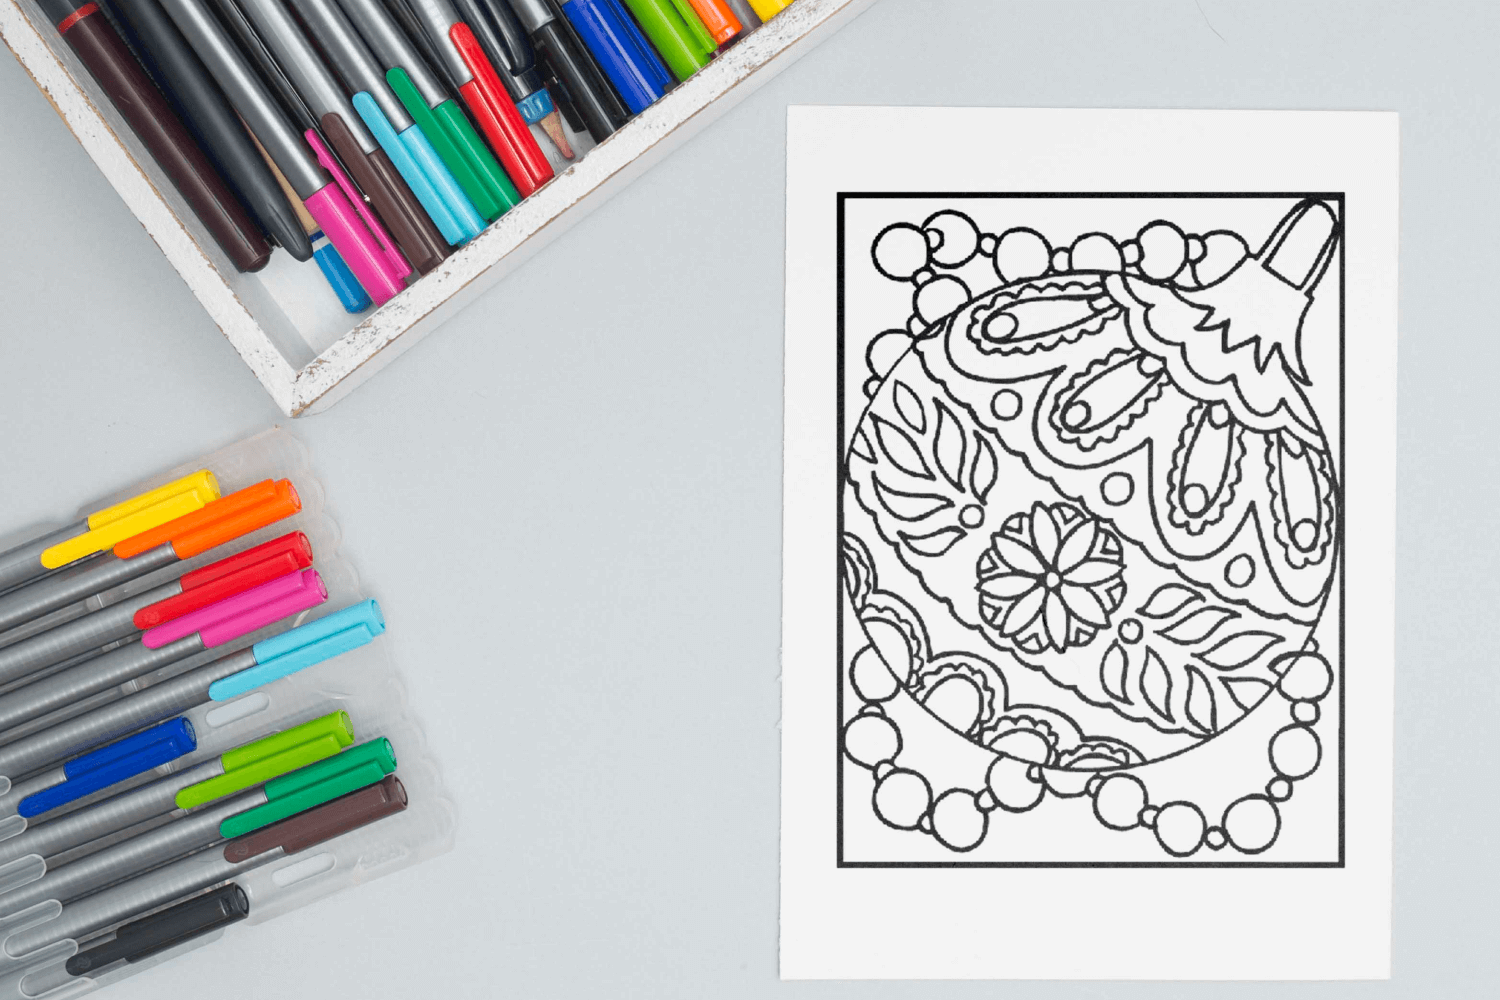 Christmas ornament coloring page facebook image.